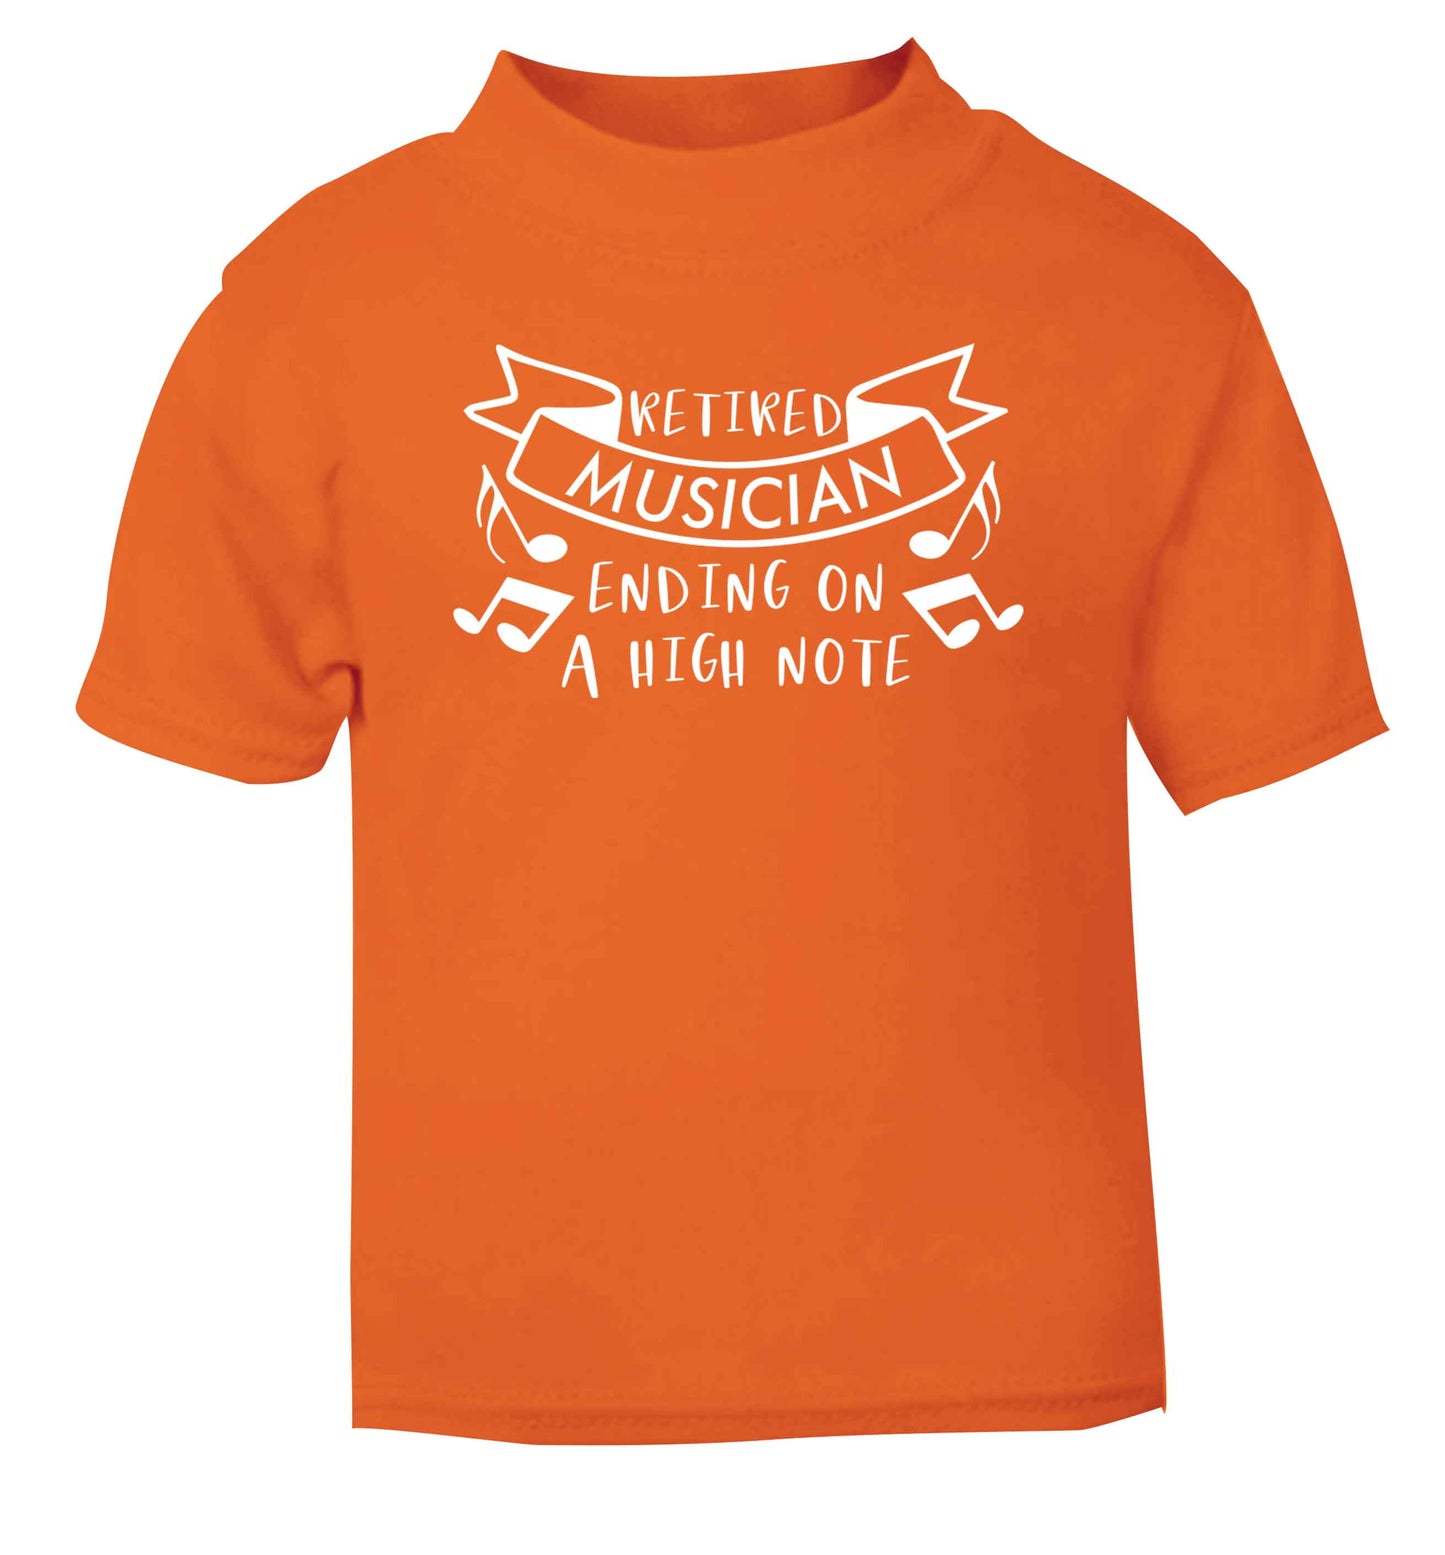 Retired musician ending on a high note orange Baby Toddler Tshirt 2 Years